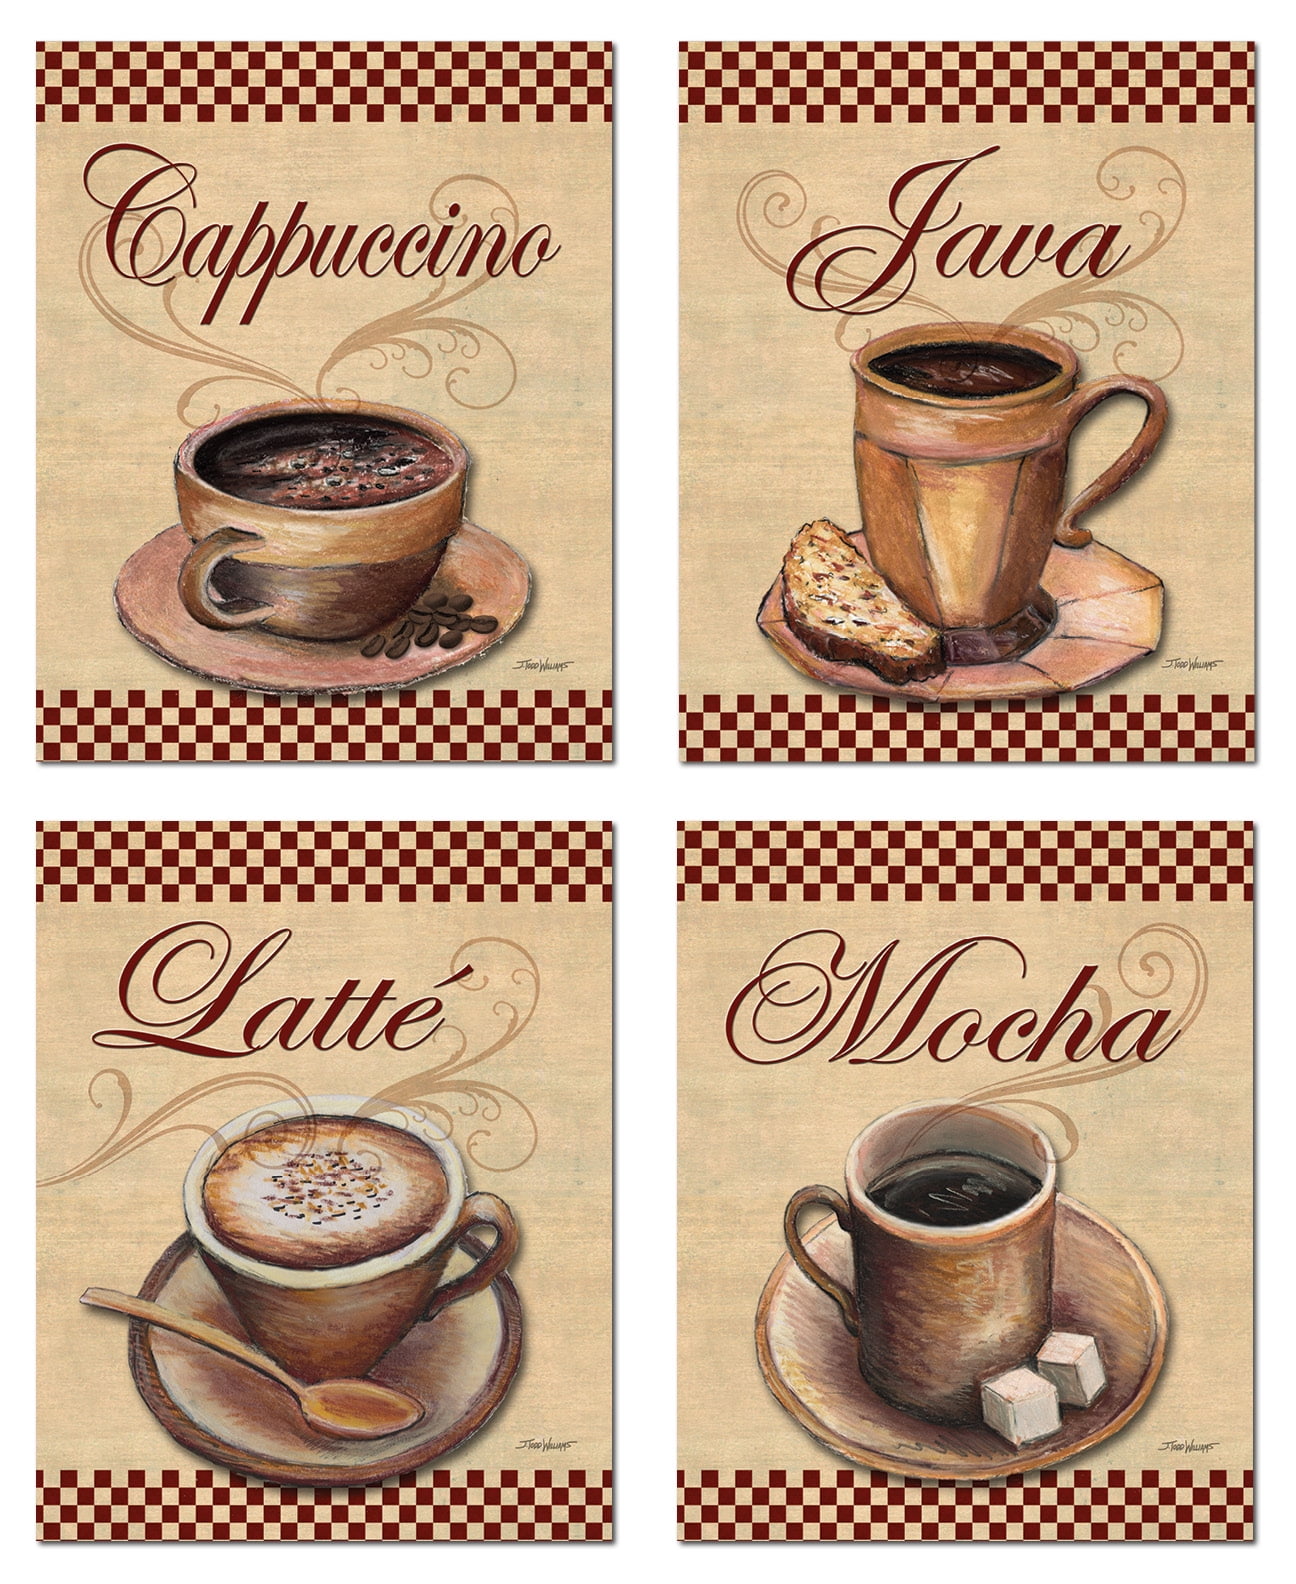 Which Material Makes for the Best Coffee Cup? - Mochas & Javas